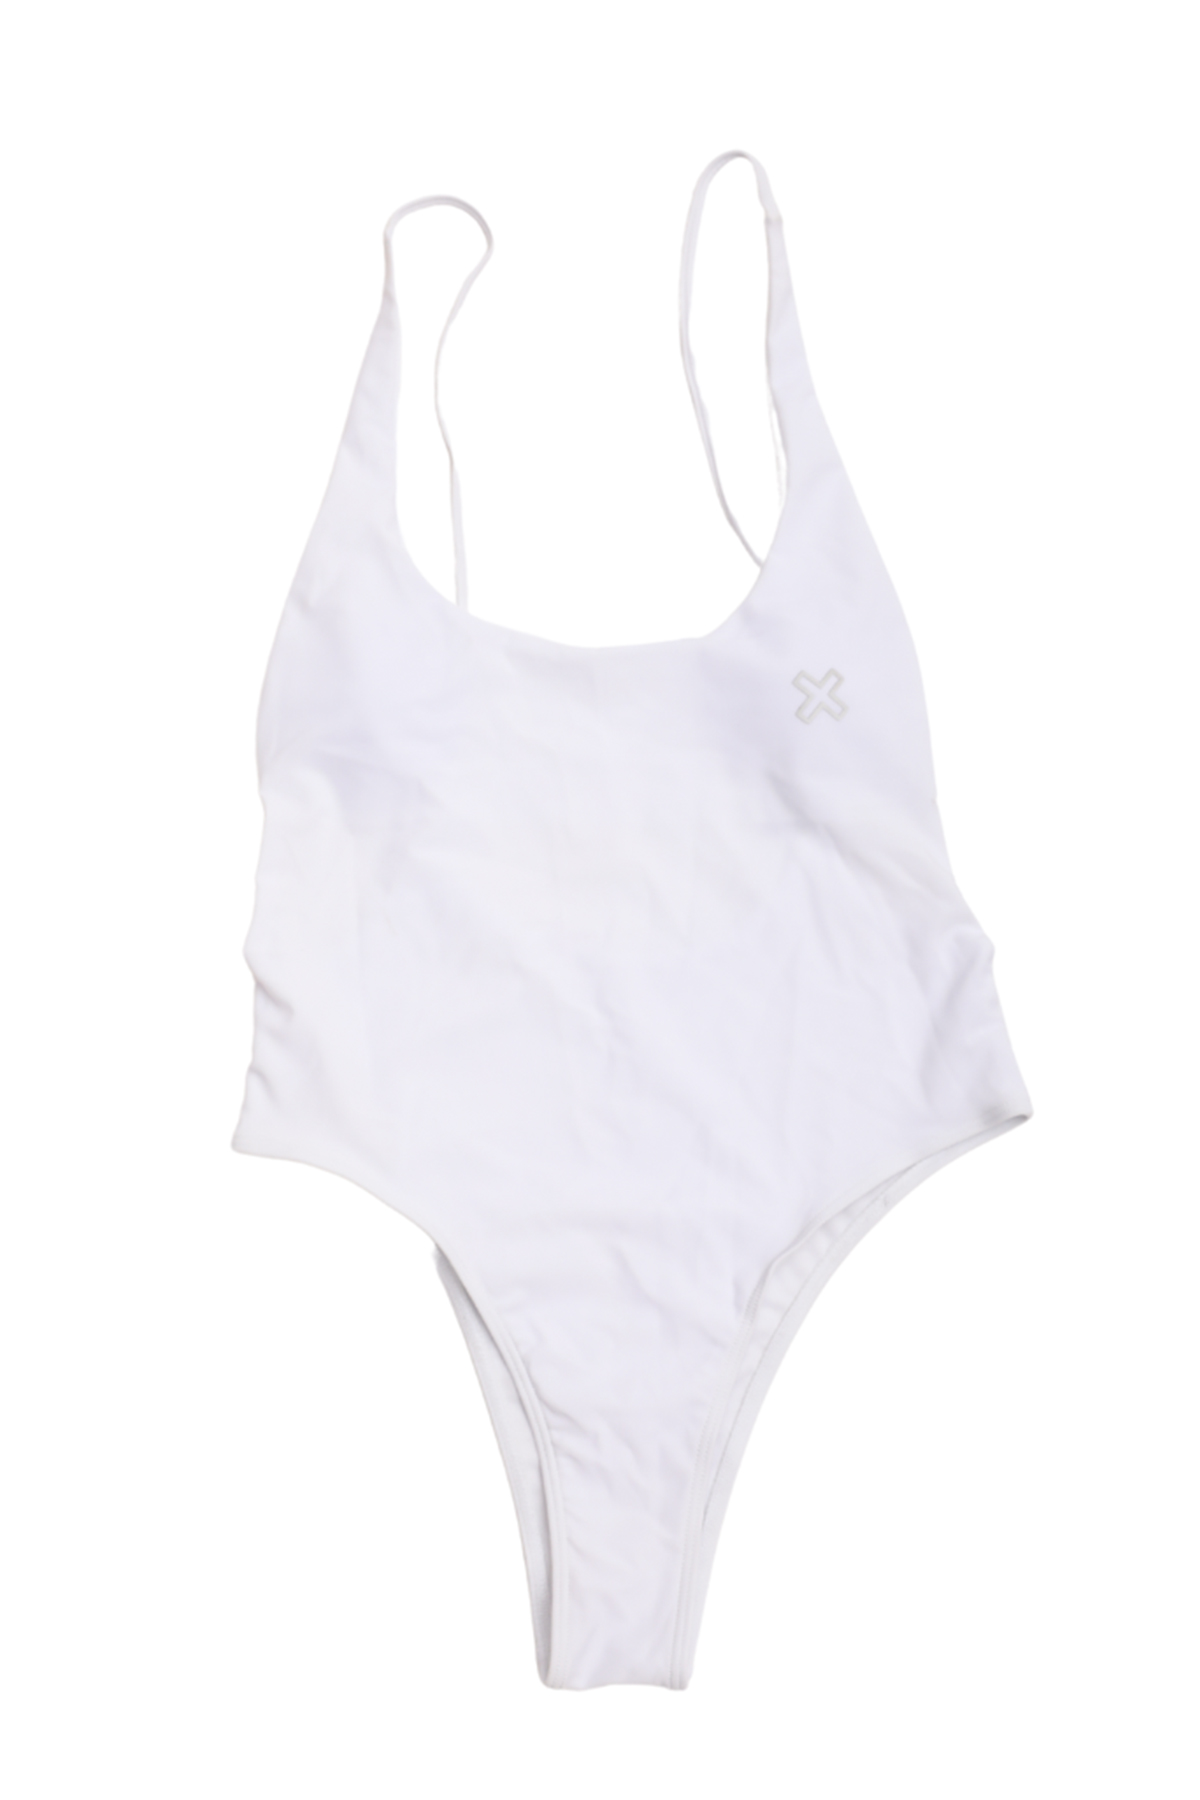 Time-Out-X-One-Piece-Bikini-Swimsuit—White—Front